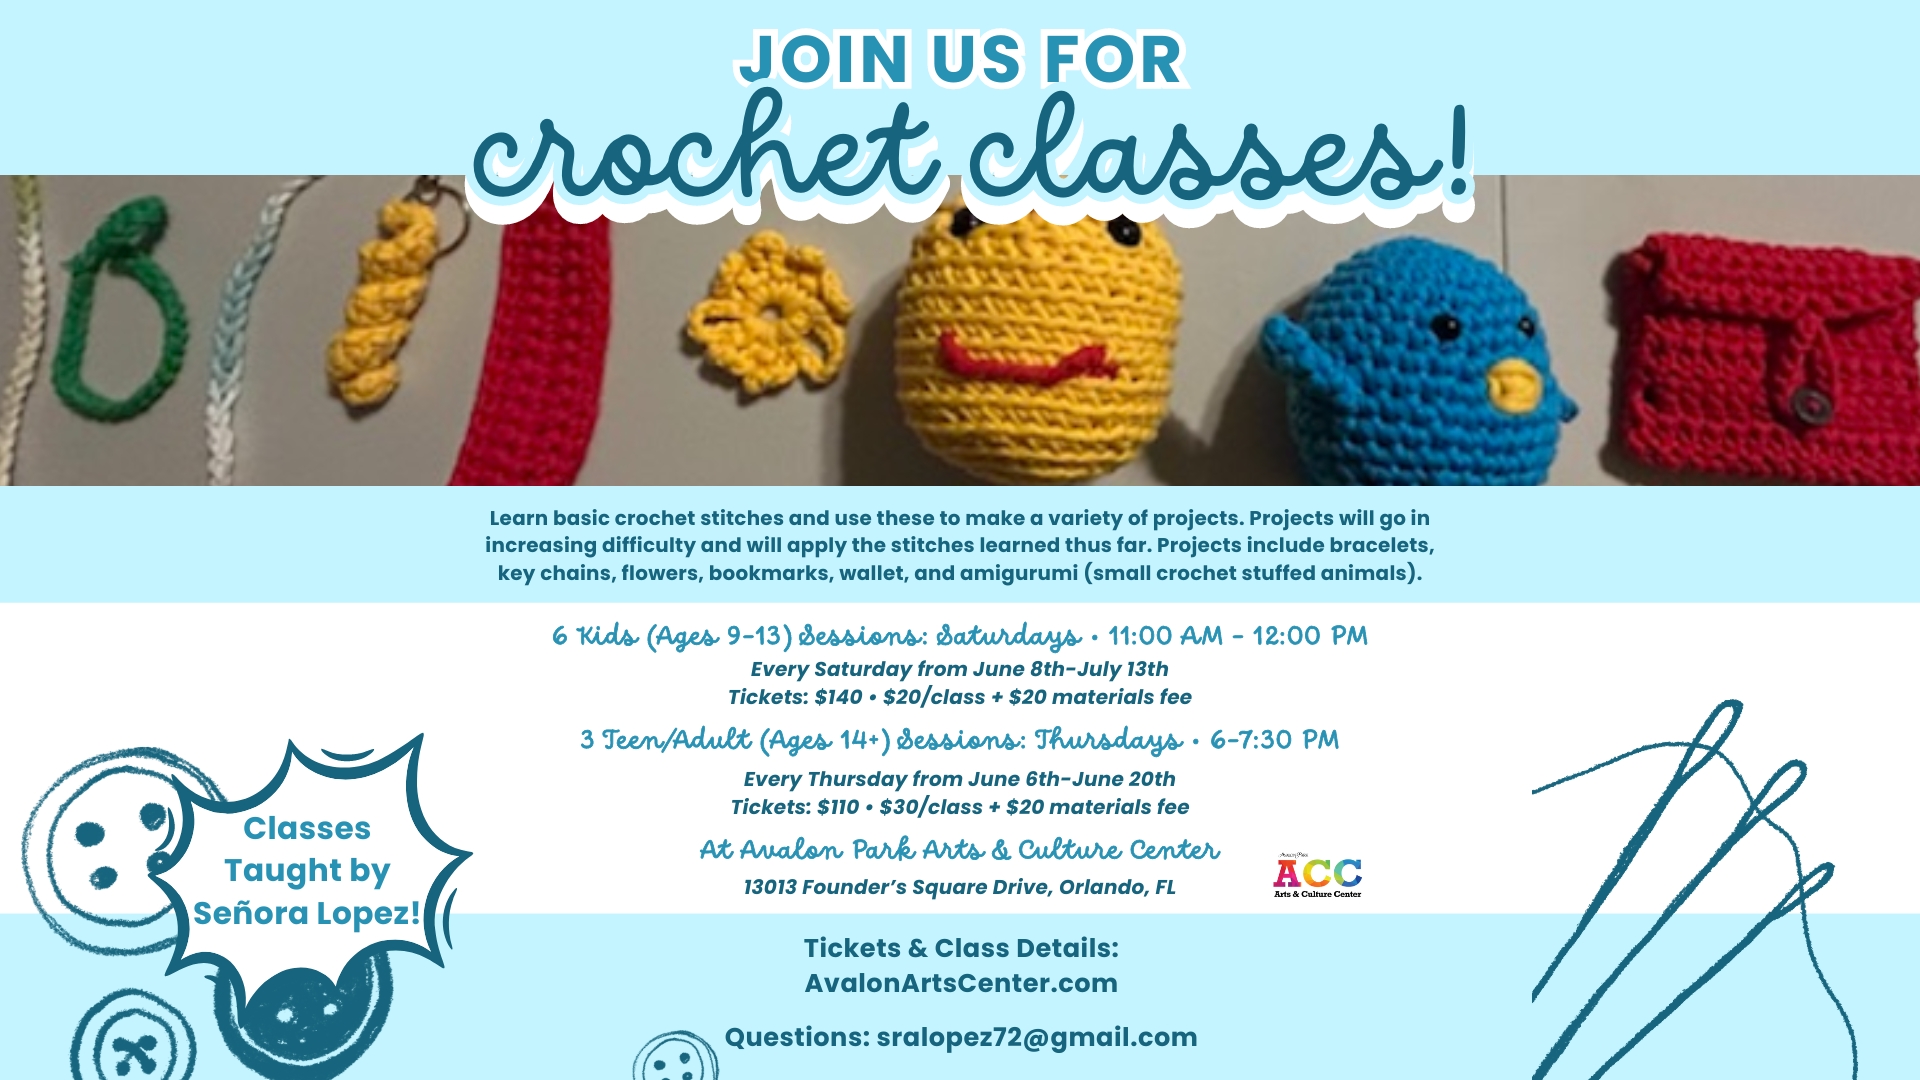 Crochet Classes at ACC cover image